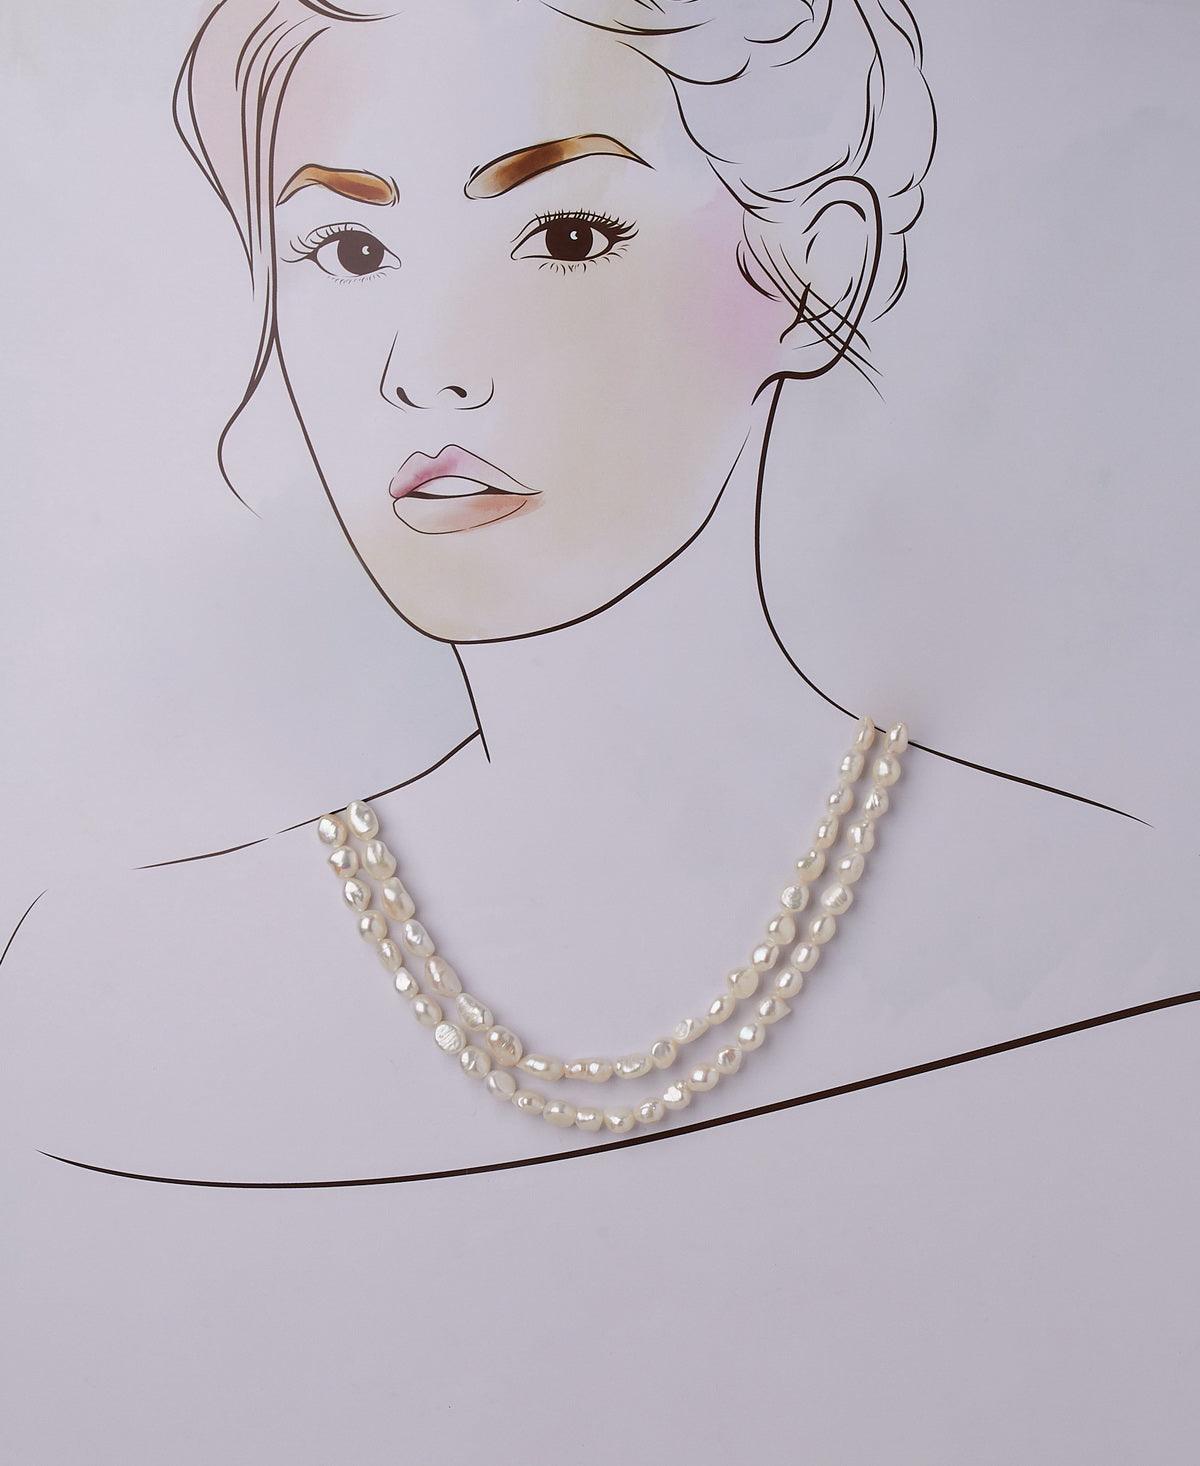 Fashionable baroque Pearl Necklace - Chandrani Pearls